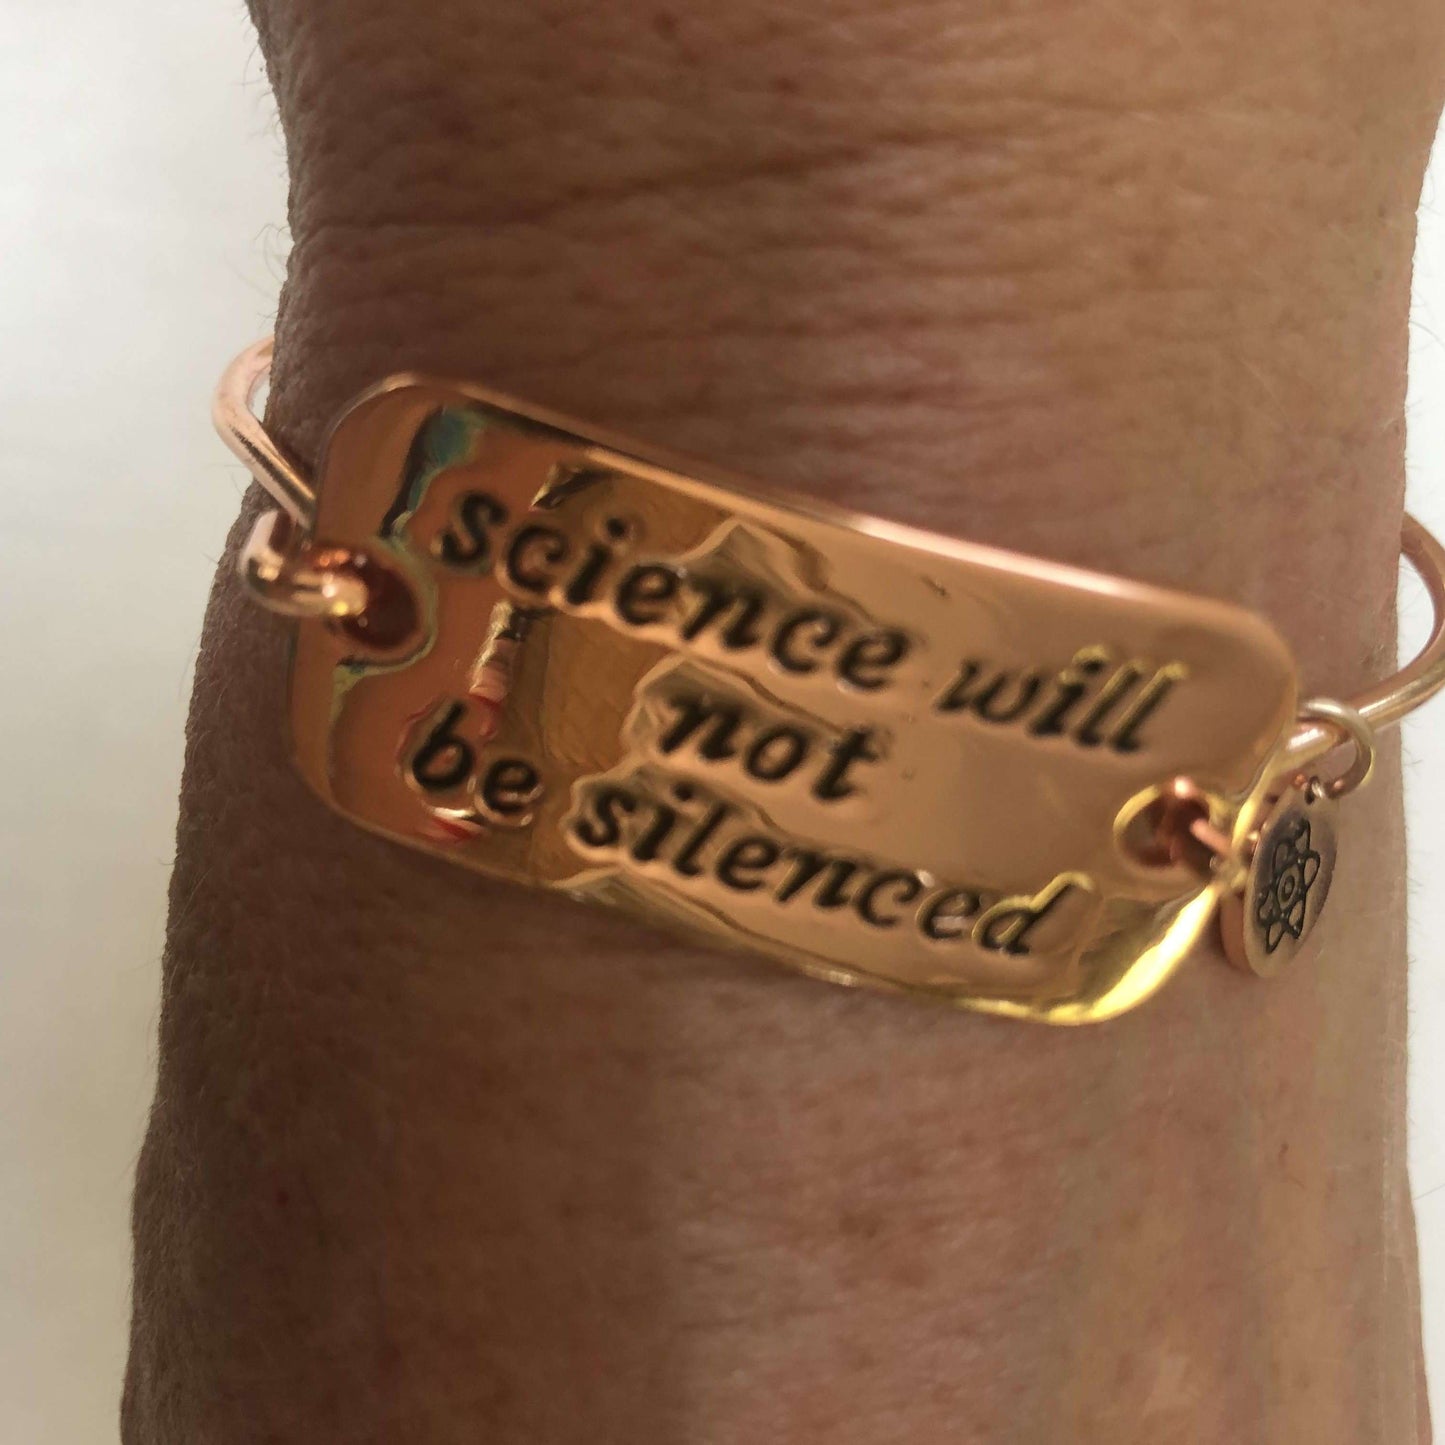 Just Imagine Bracelets  - Not Upcycled - Science Matters!